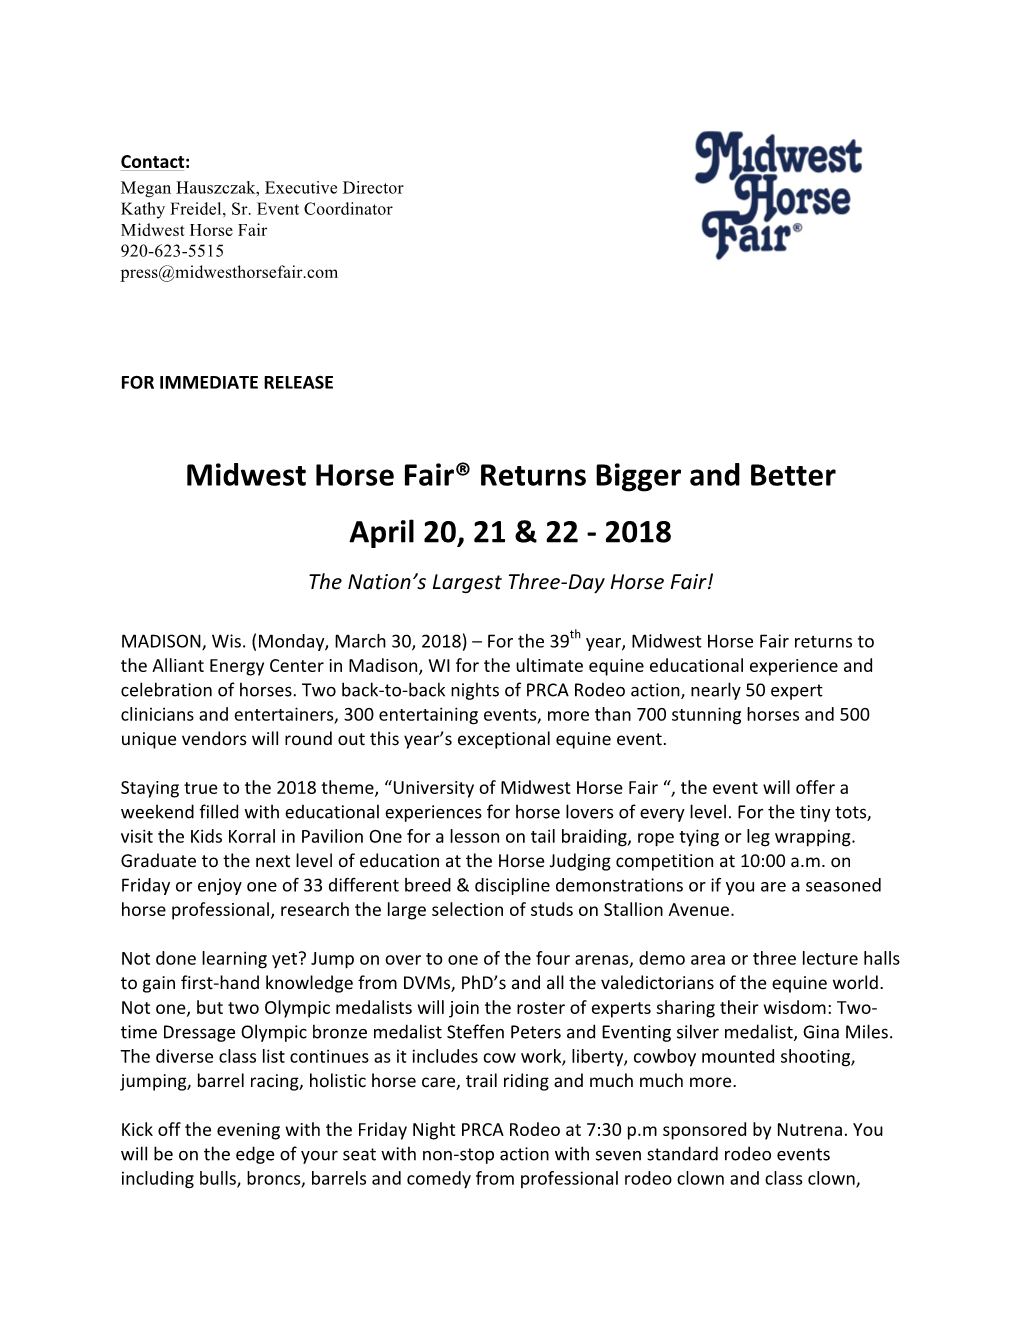 Midwest Horse Fair® Returns Bigger and Better April 20, 21 & 22 - 2018 the Nation’S Largest Three-Day Horse Fair!